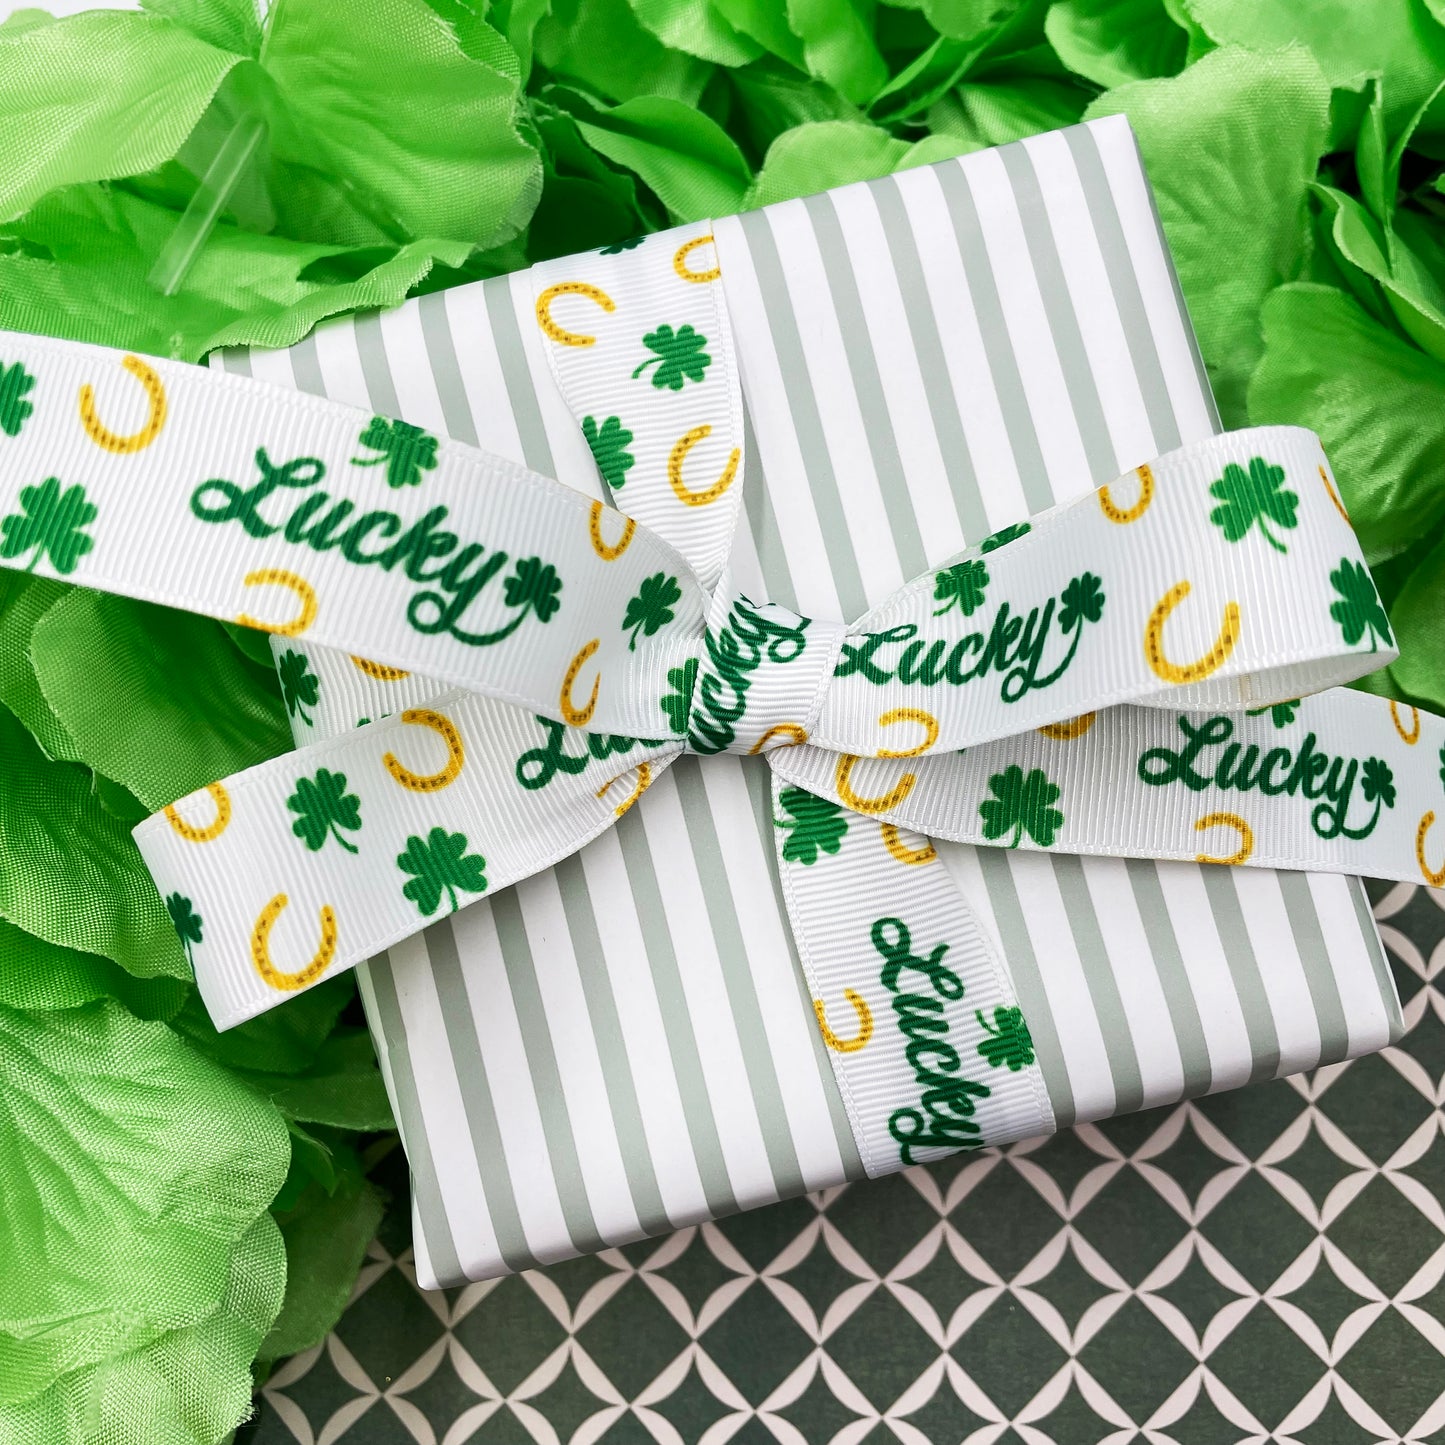 Lucky ribbon for St Patrick's Day  and Equestrian events with horse shoes and tossed shamrocks printed on 7/8" white satin and grosgrain